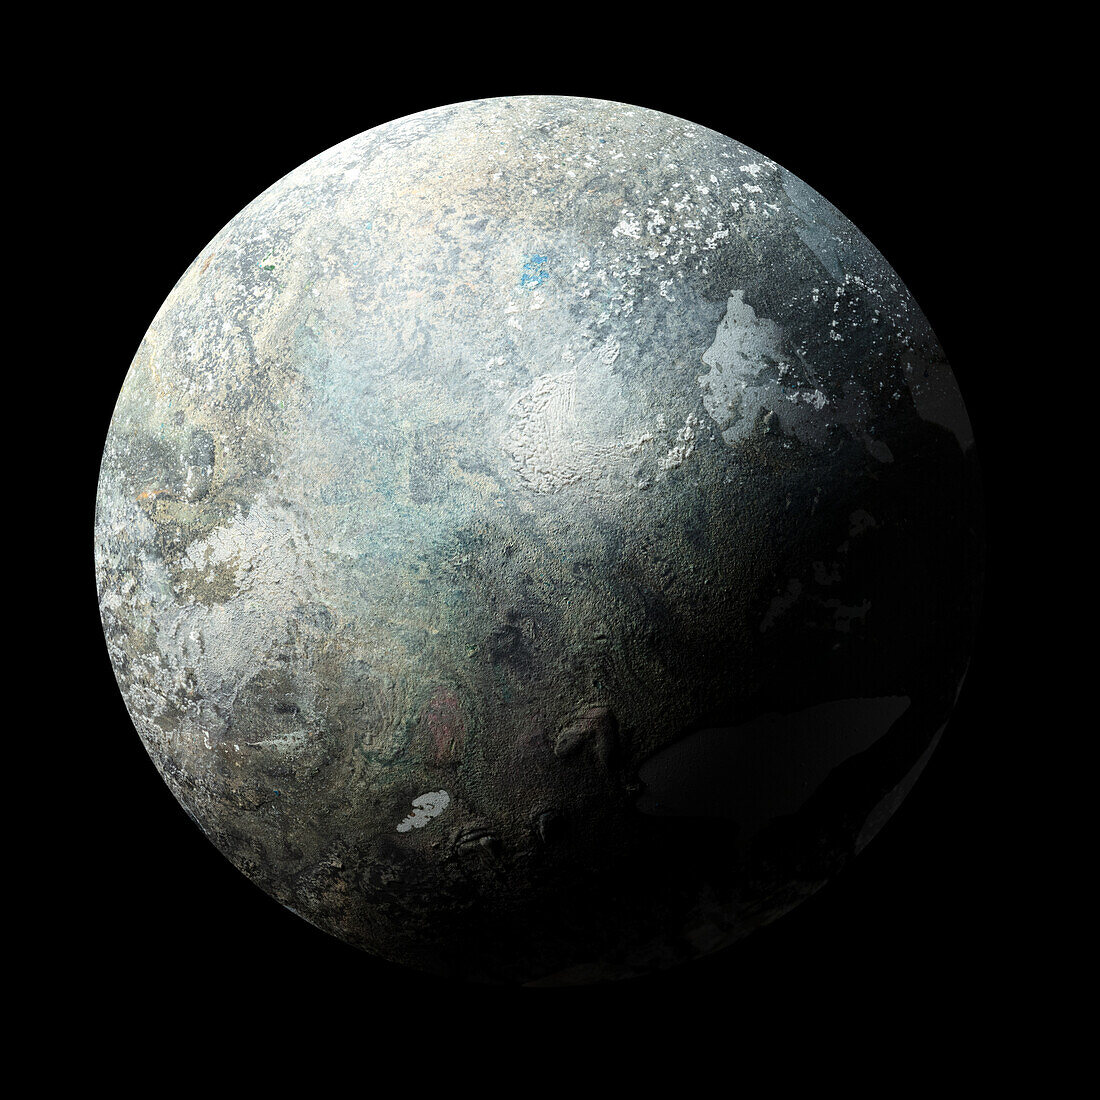 Earth-like rocky planet with clouds, composite image